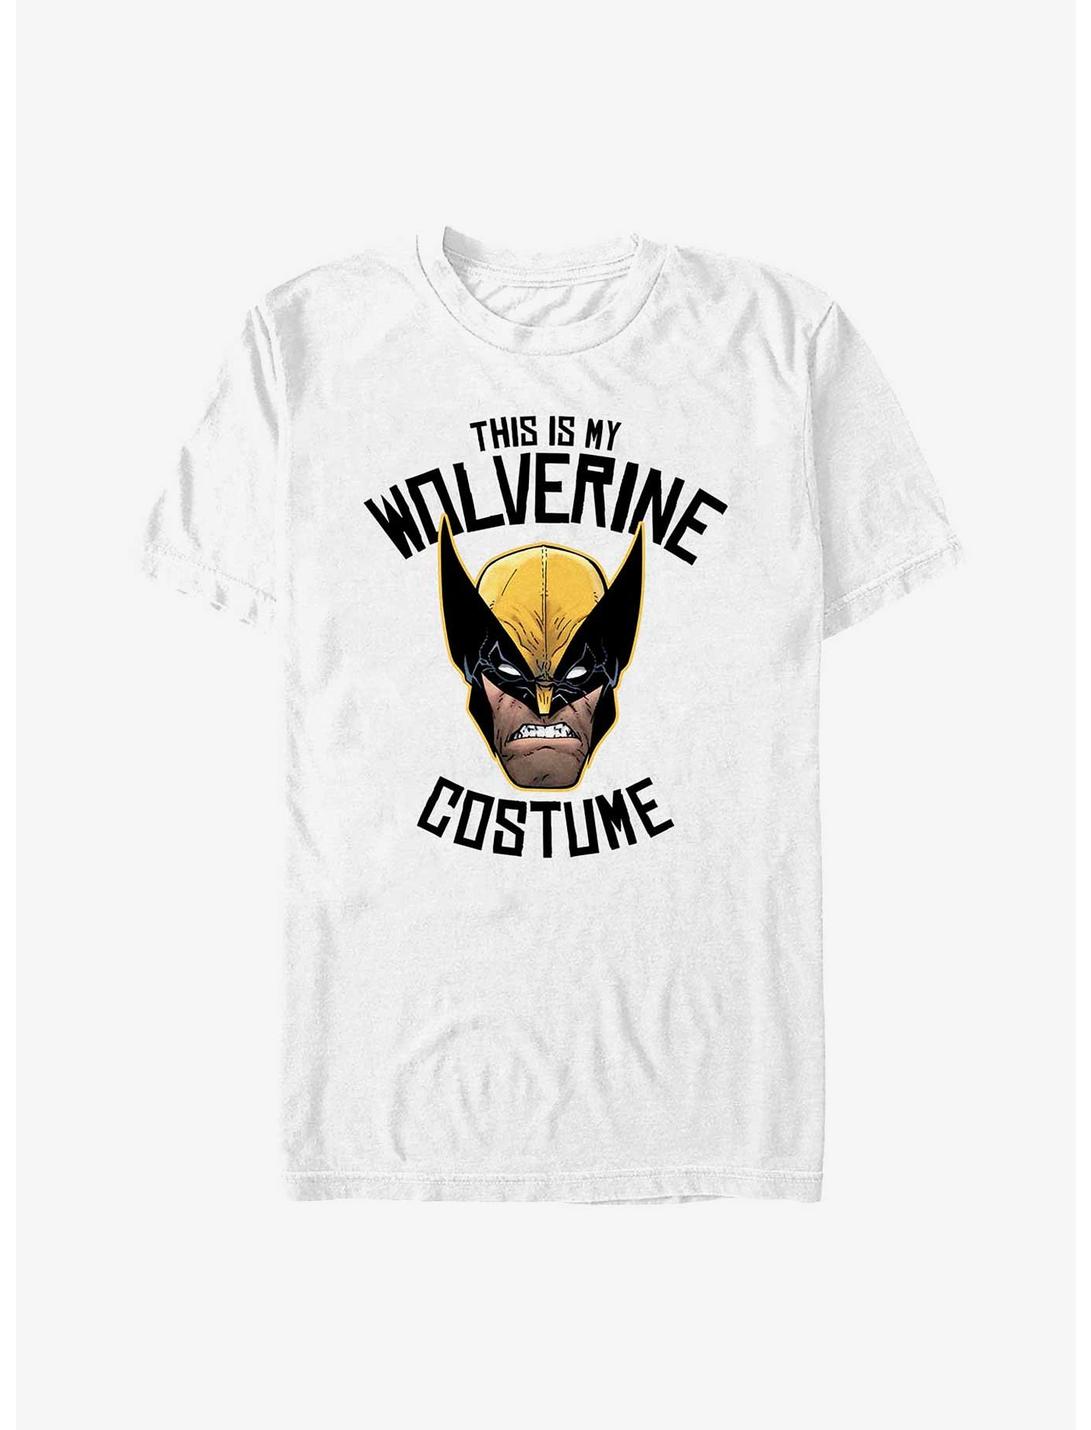 Marvel Wolverine This Is My Costume T-Shirt, WHITE, hi-res